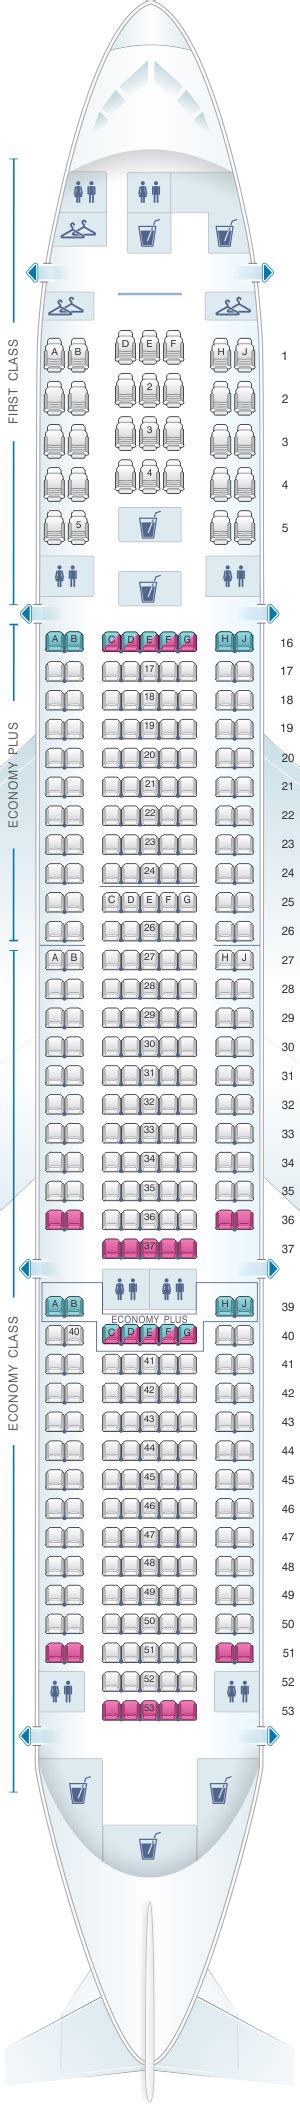 United seat map 777-200. United Airlines - Airline Tickets, Travel Deals and Flights If you're seeing this message, that means JavaScript has been disabled on your browser, please enable JS ... 